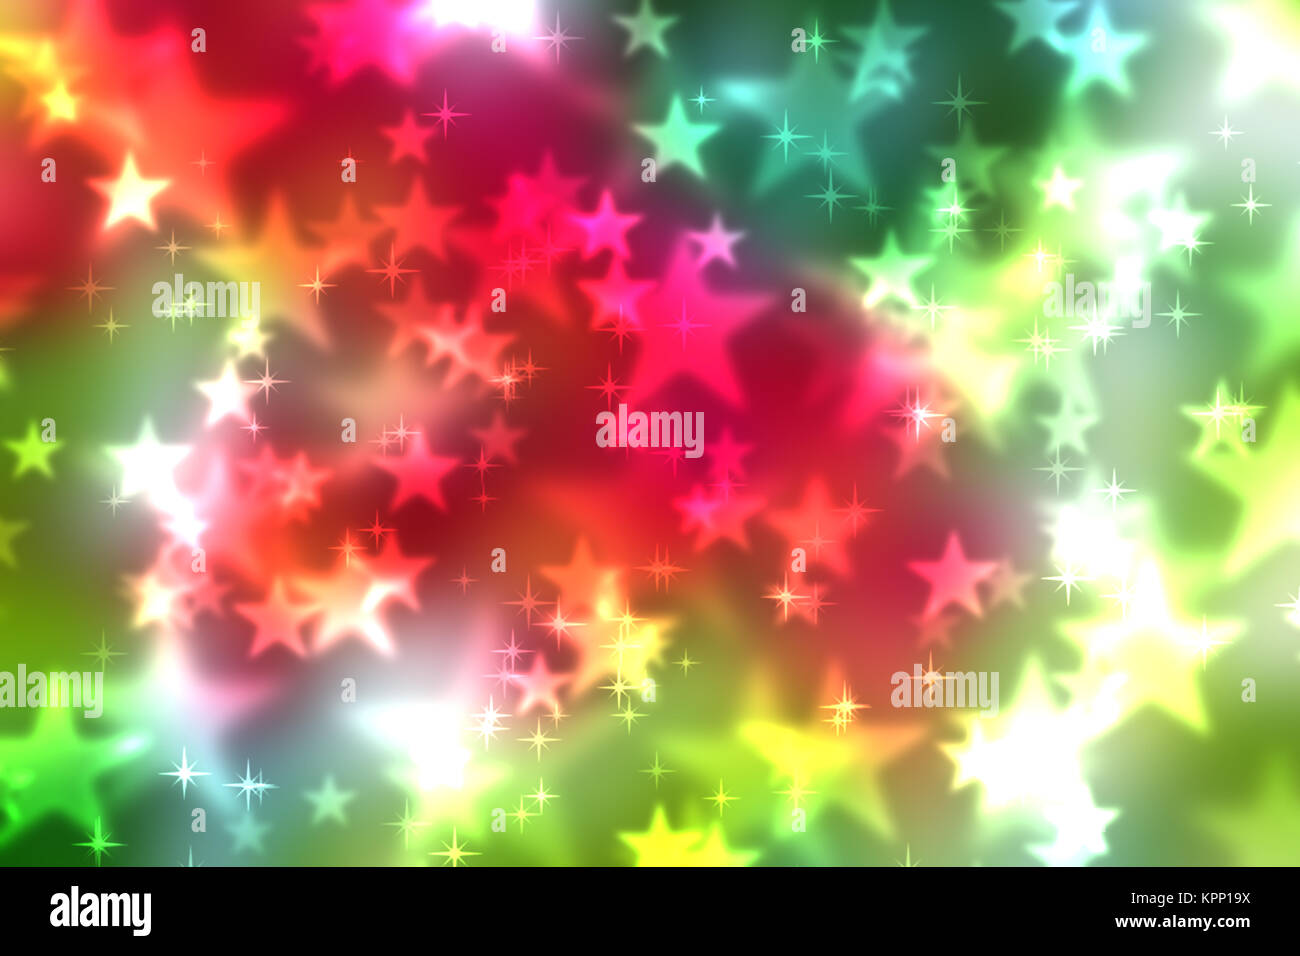 Abstract heart bokeh bright background Stock Photo